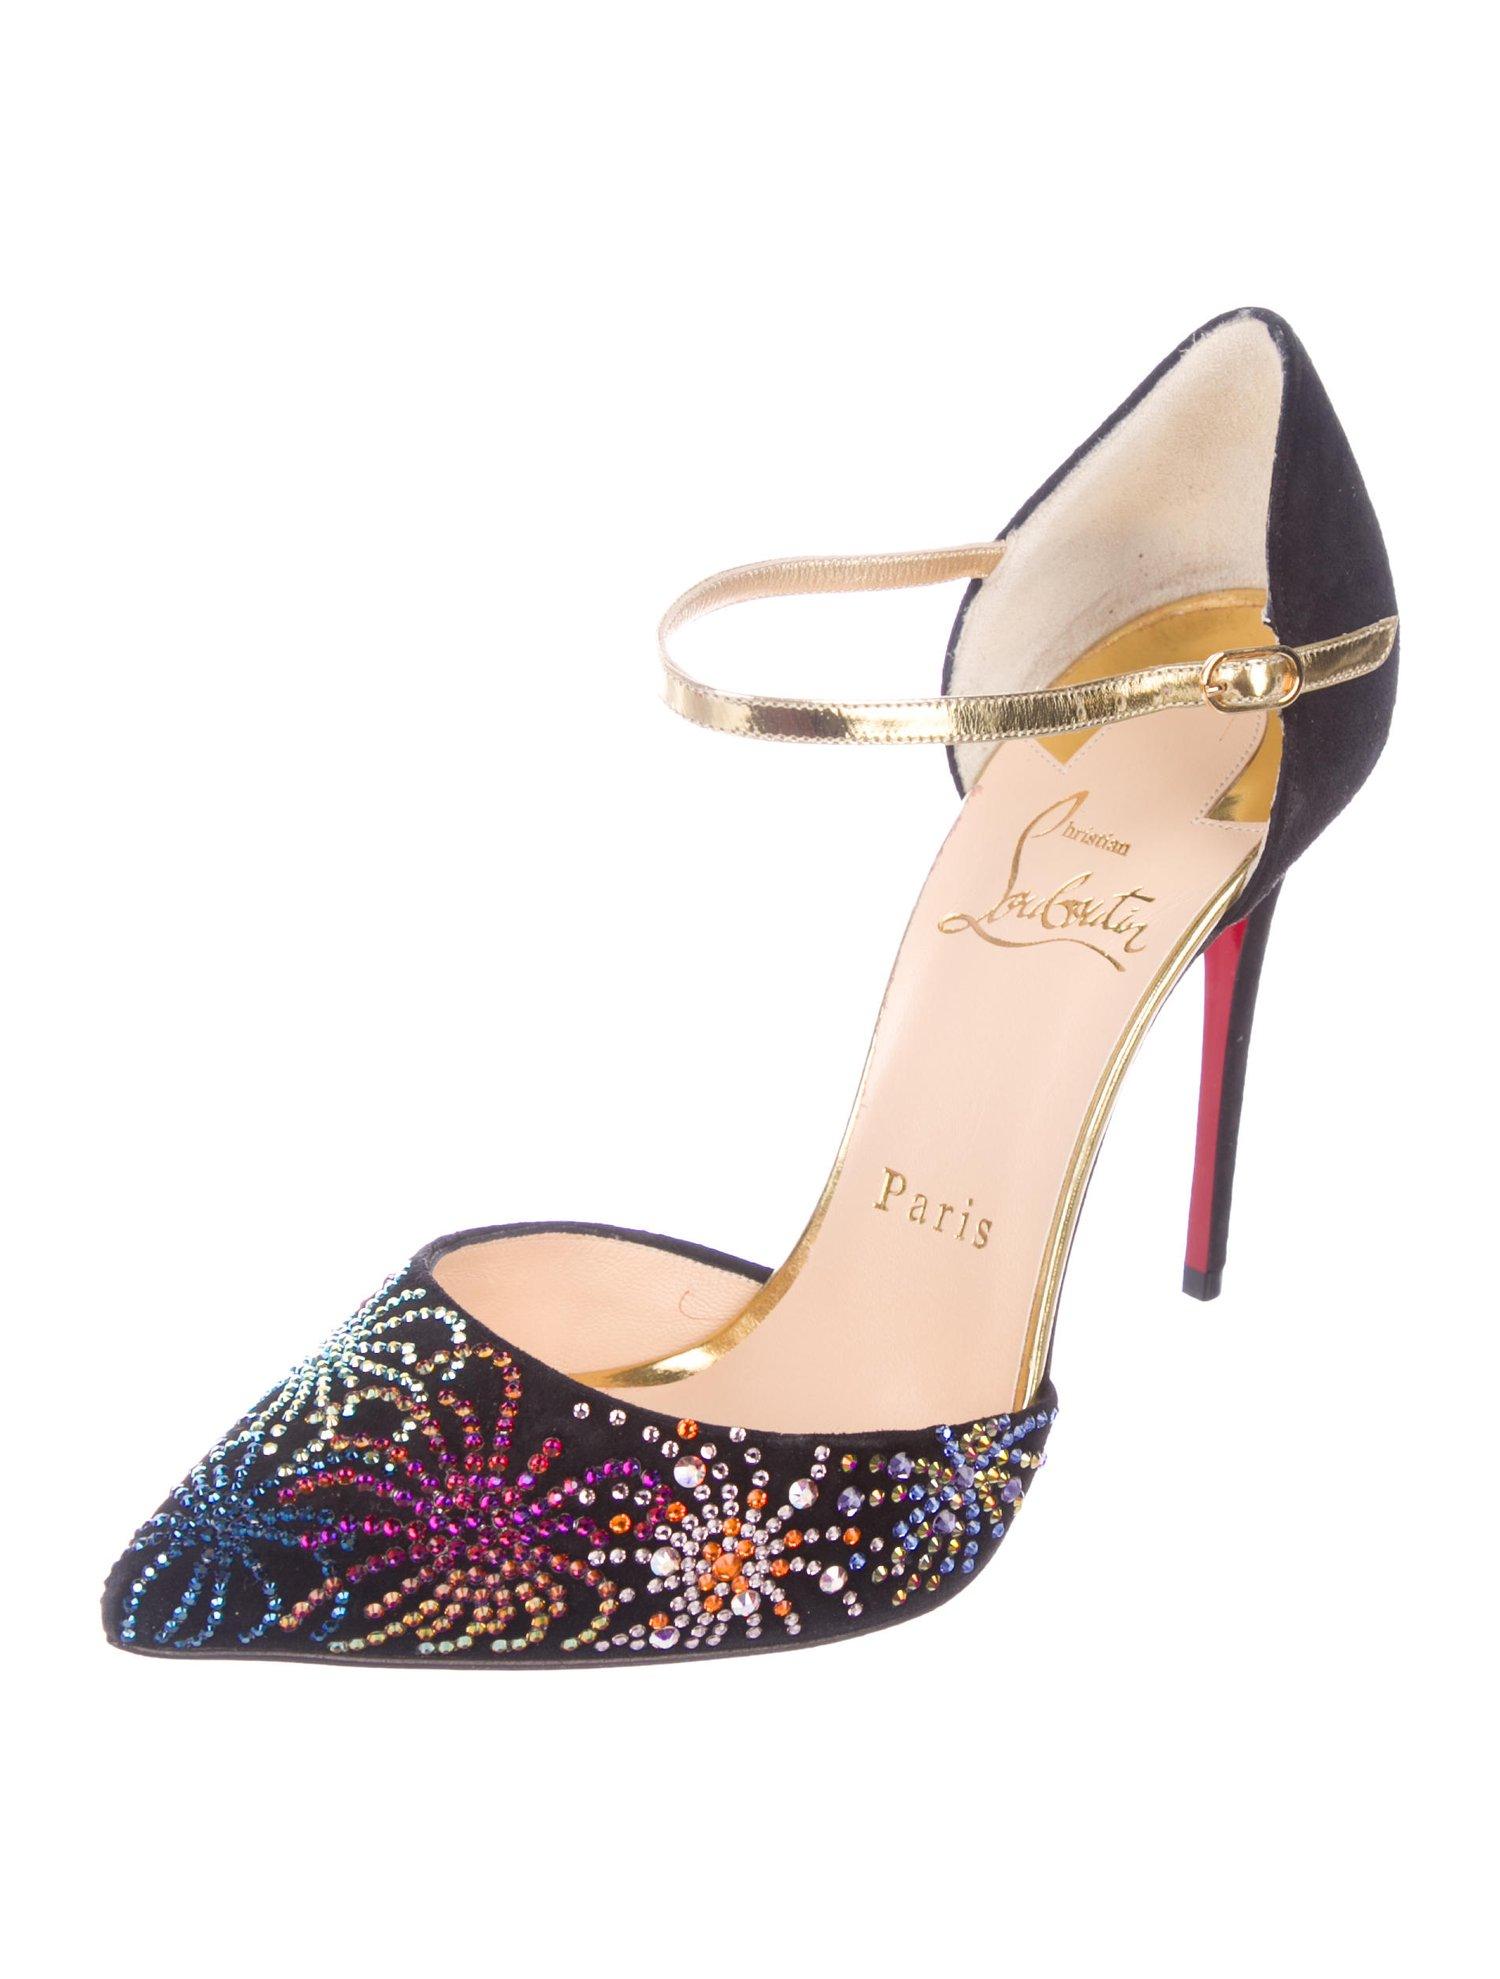 Women's Christian Louboutin NEW Black Suede Multi Holiday Evening Crystal Pumps Heels 